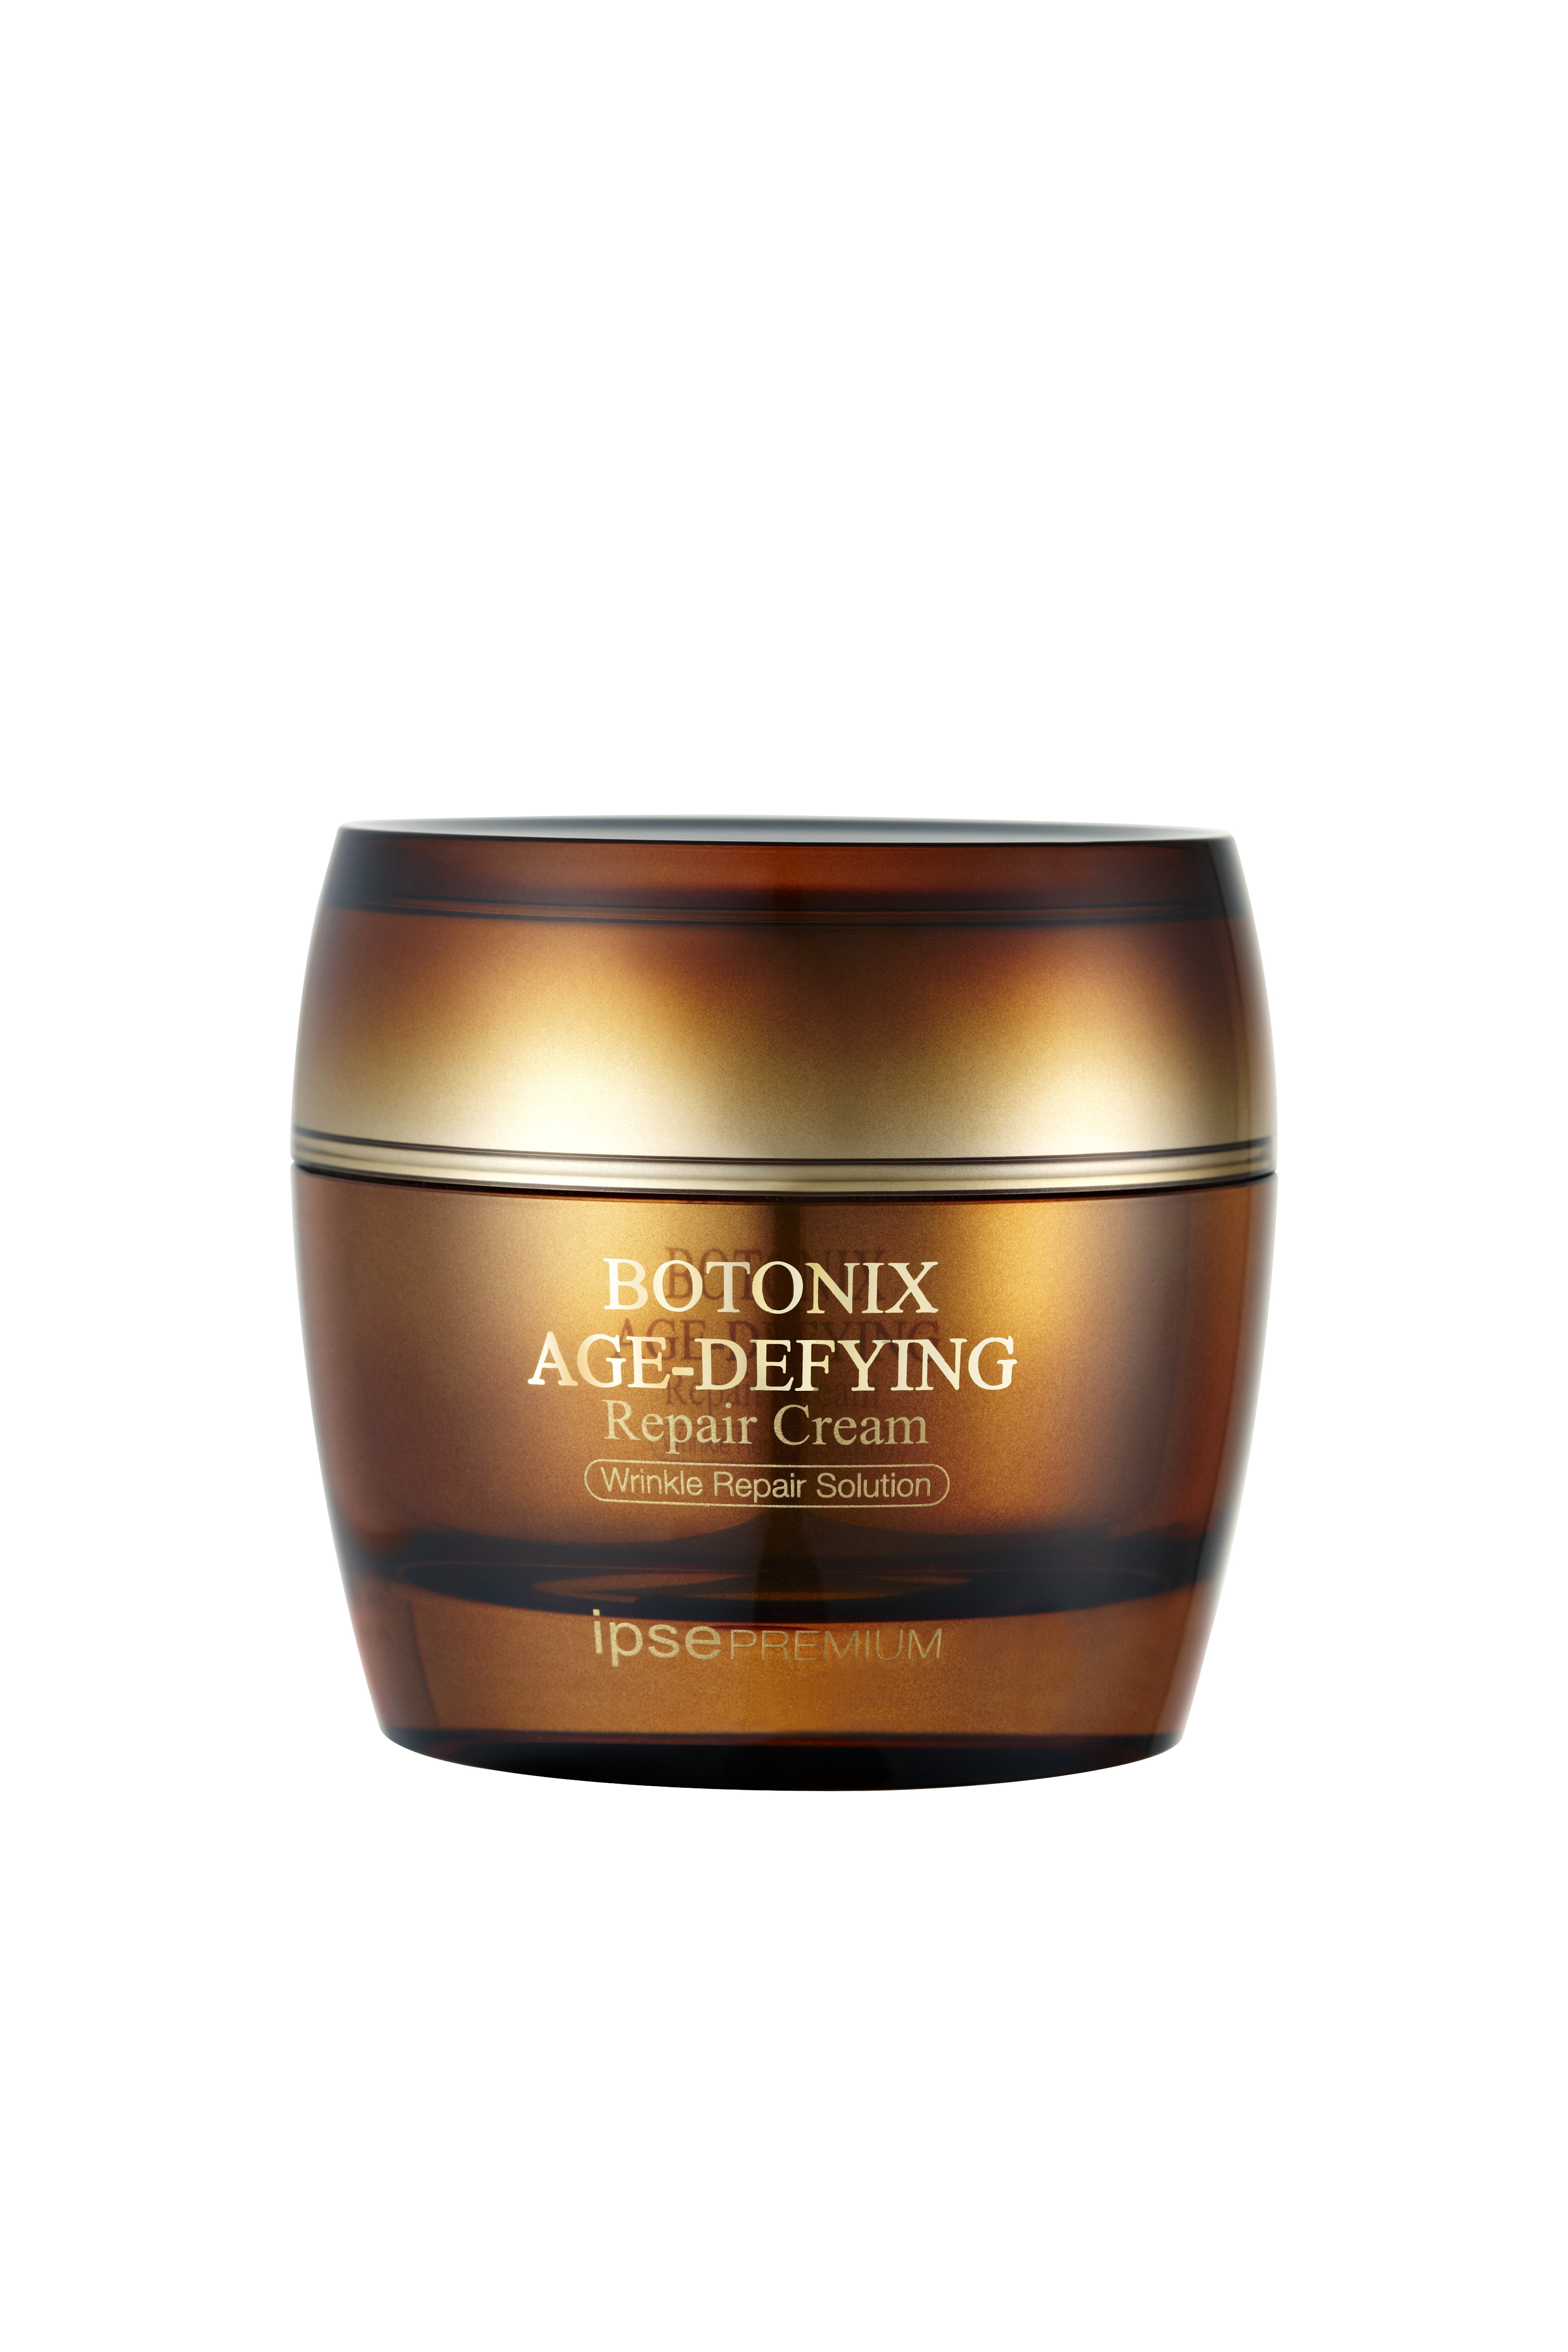 BOTONIX Natural Age Defying Cream 24K Gold and 8 Peptides Lifting & Firming  Regenerating Skin Collagen